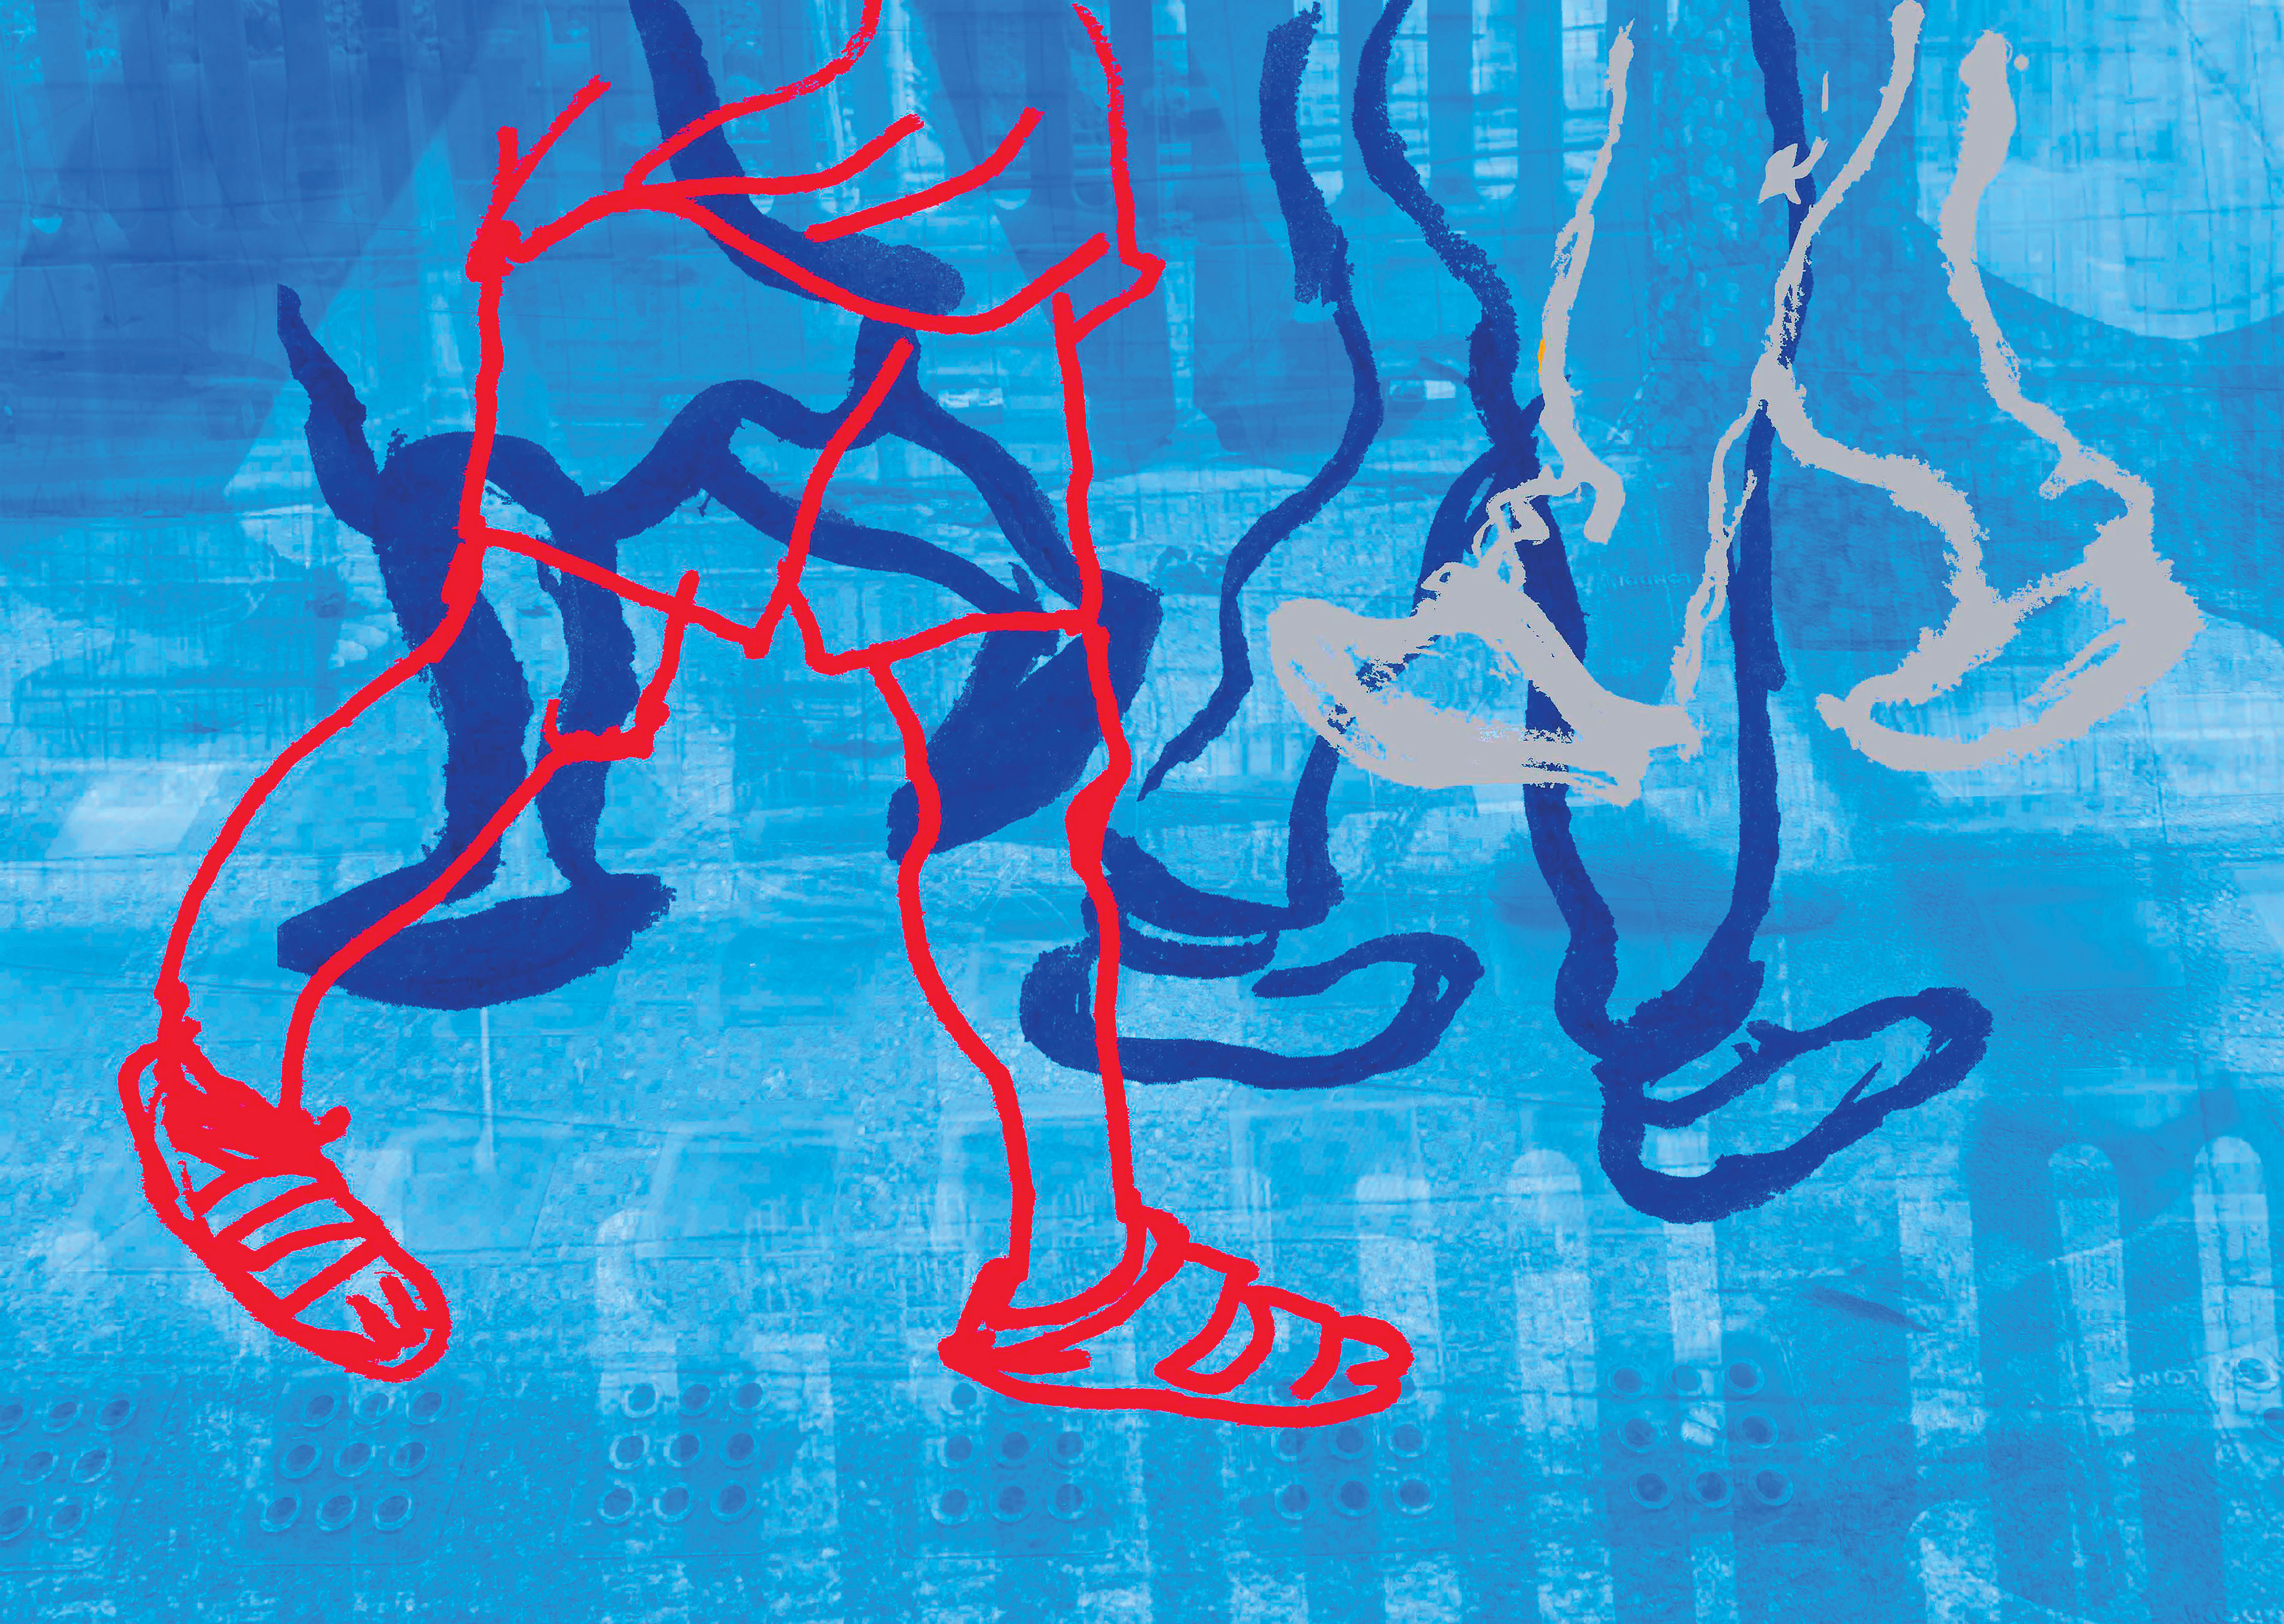 This second image shows another corresponsing visual piece. It is  vibrant blue in colour and shows feet moving in almost blurred motions over steps corresposing to it's partner visual image. Again, this  second image shows feet moving on what could be described as a busy cityscape, however the feet in this image are not all blue but are contrasted with some red, white and emboldened textures of blue throughout to show almost the shadowing of feet moving.